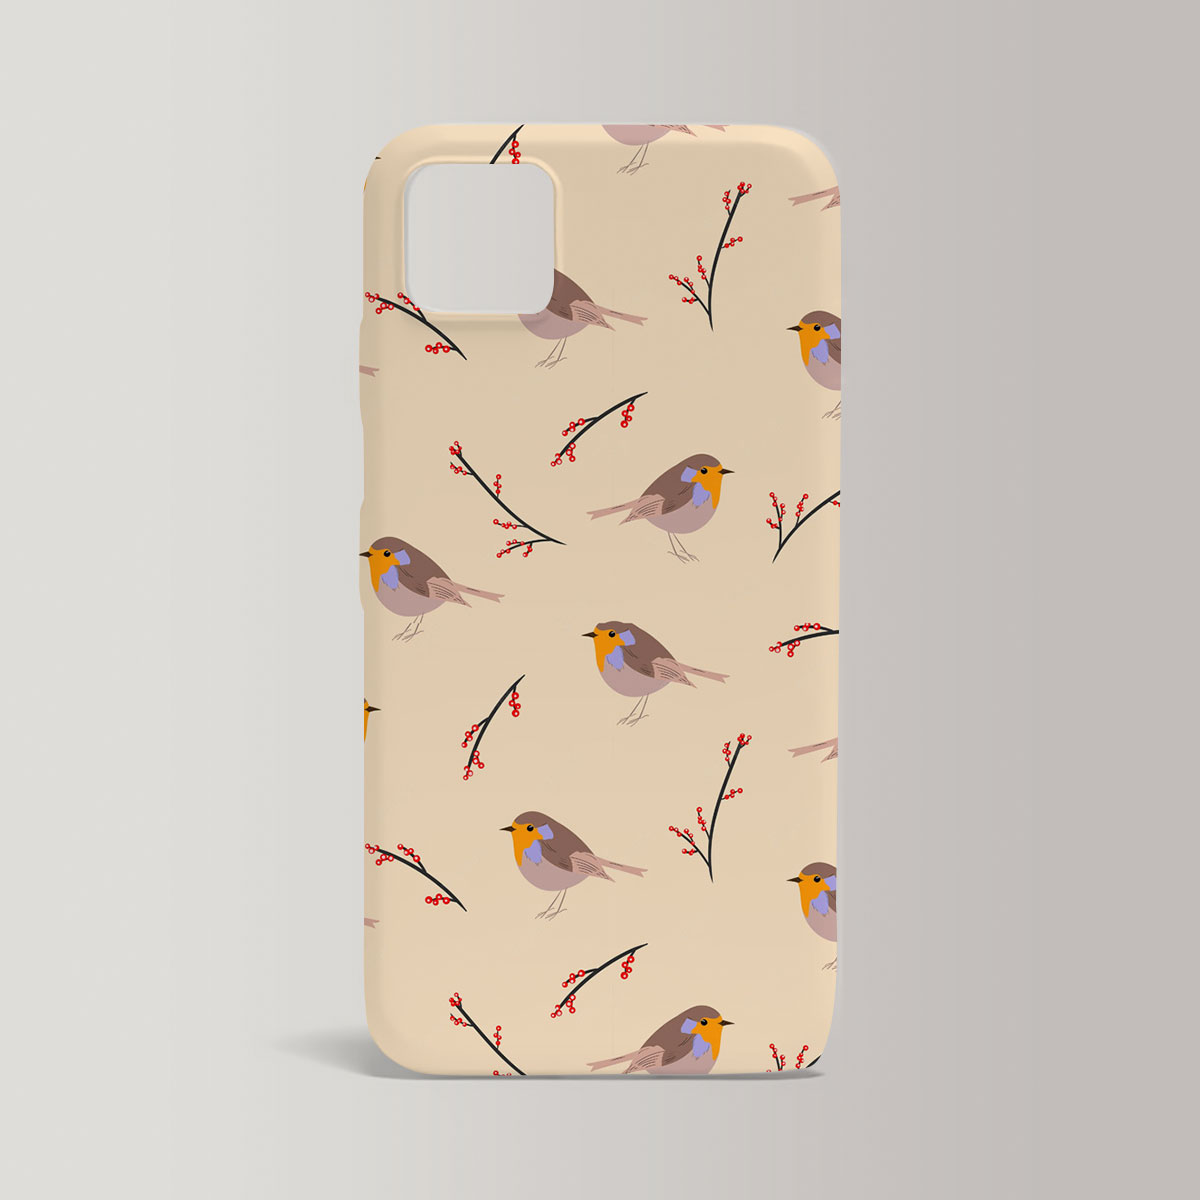 Coon Little Finch Iphone Case